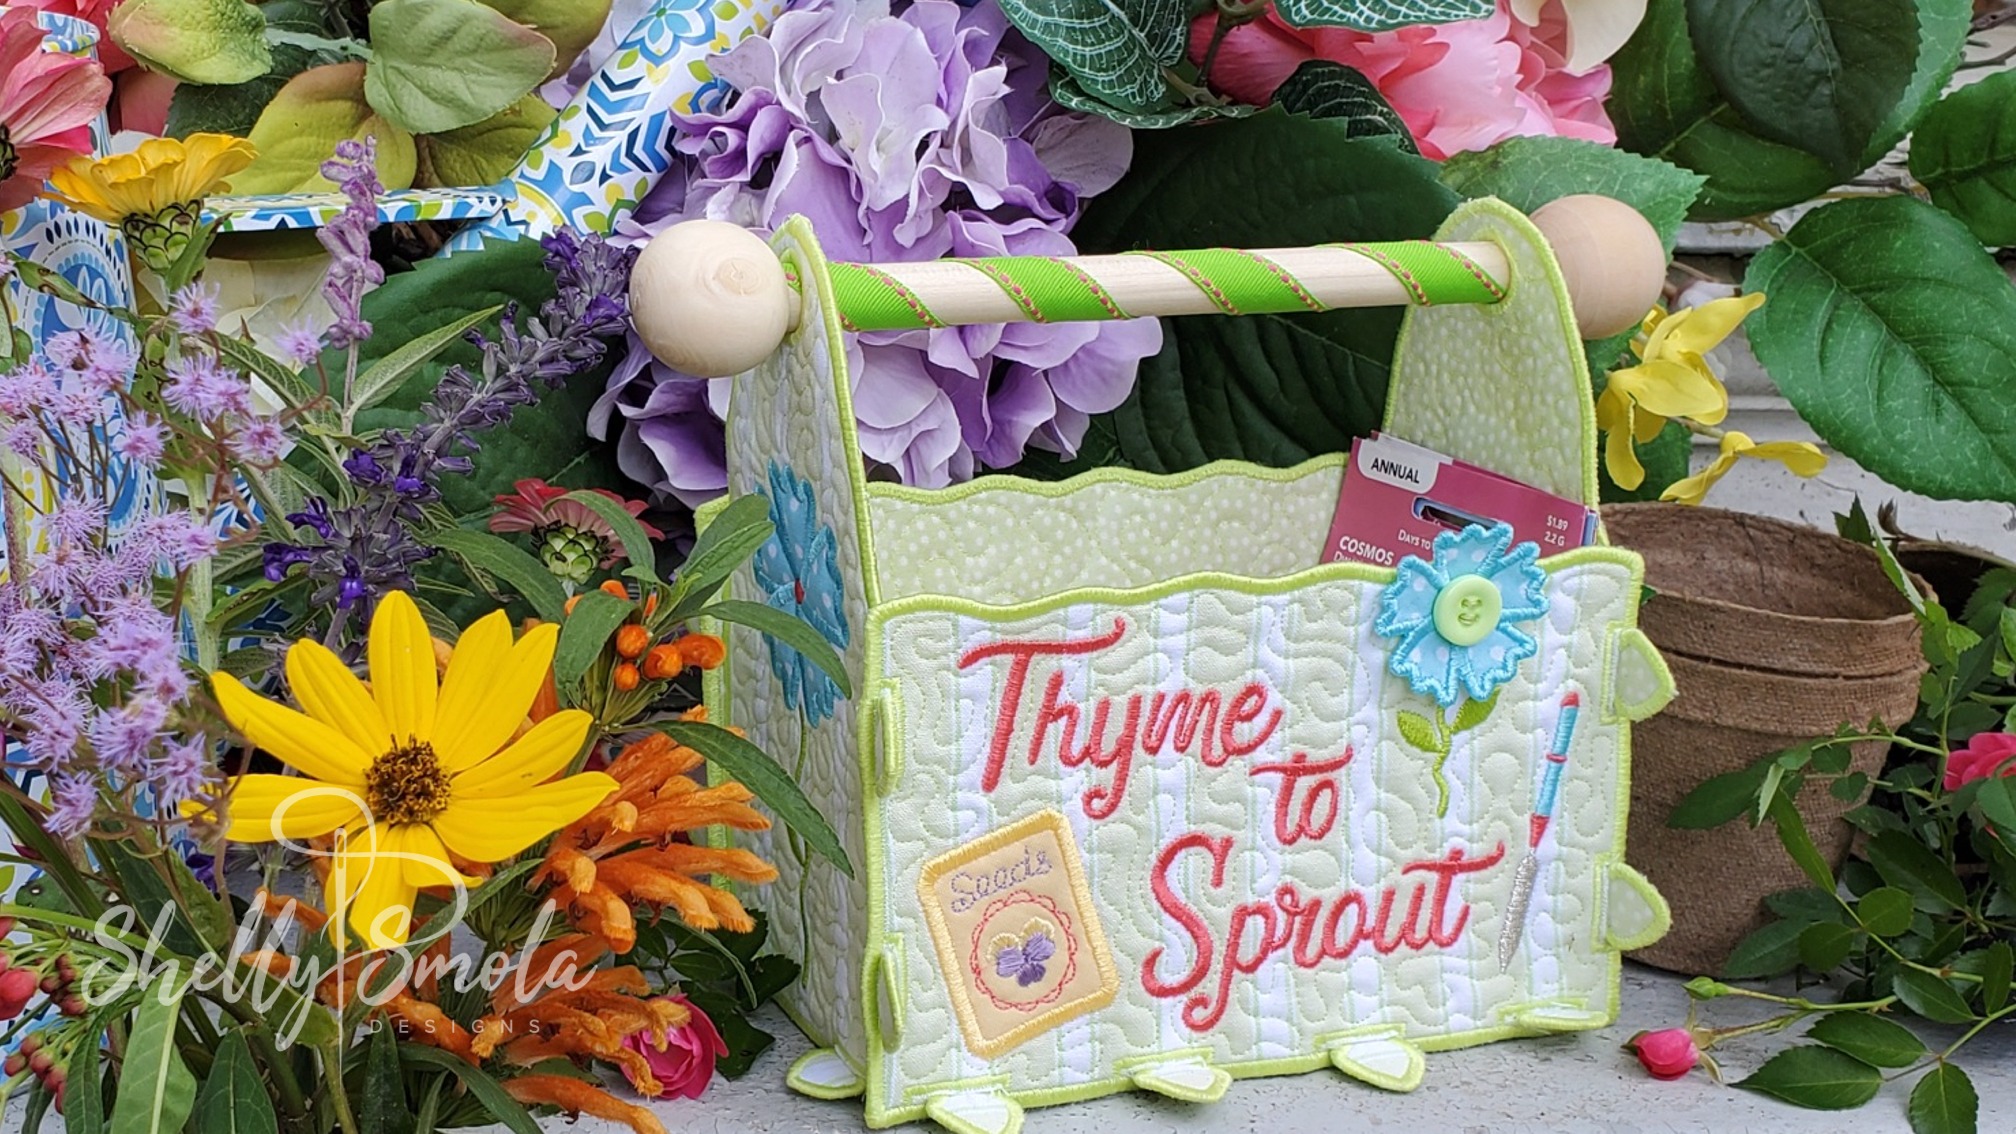 Thyme to Sprout Basket by Shelly Smola